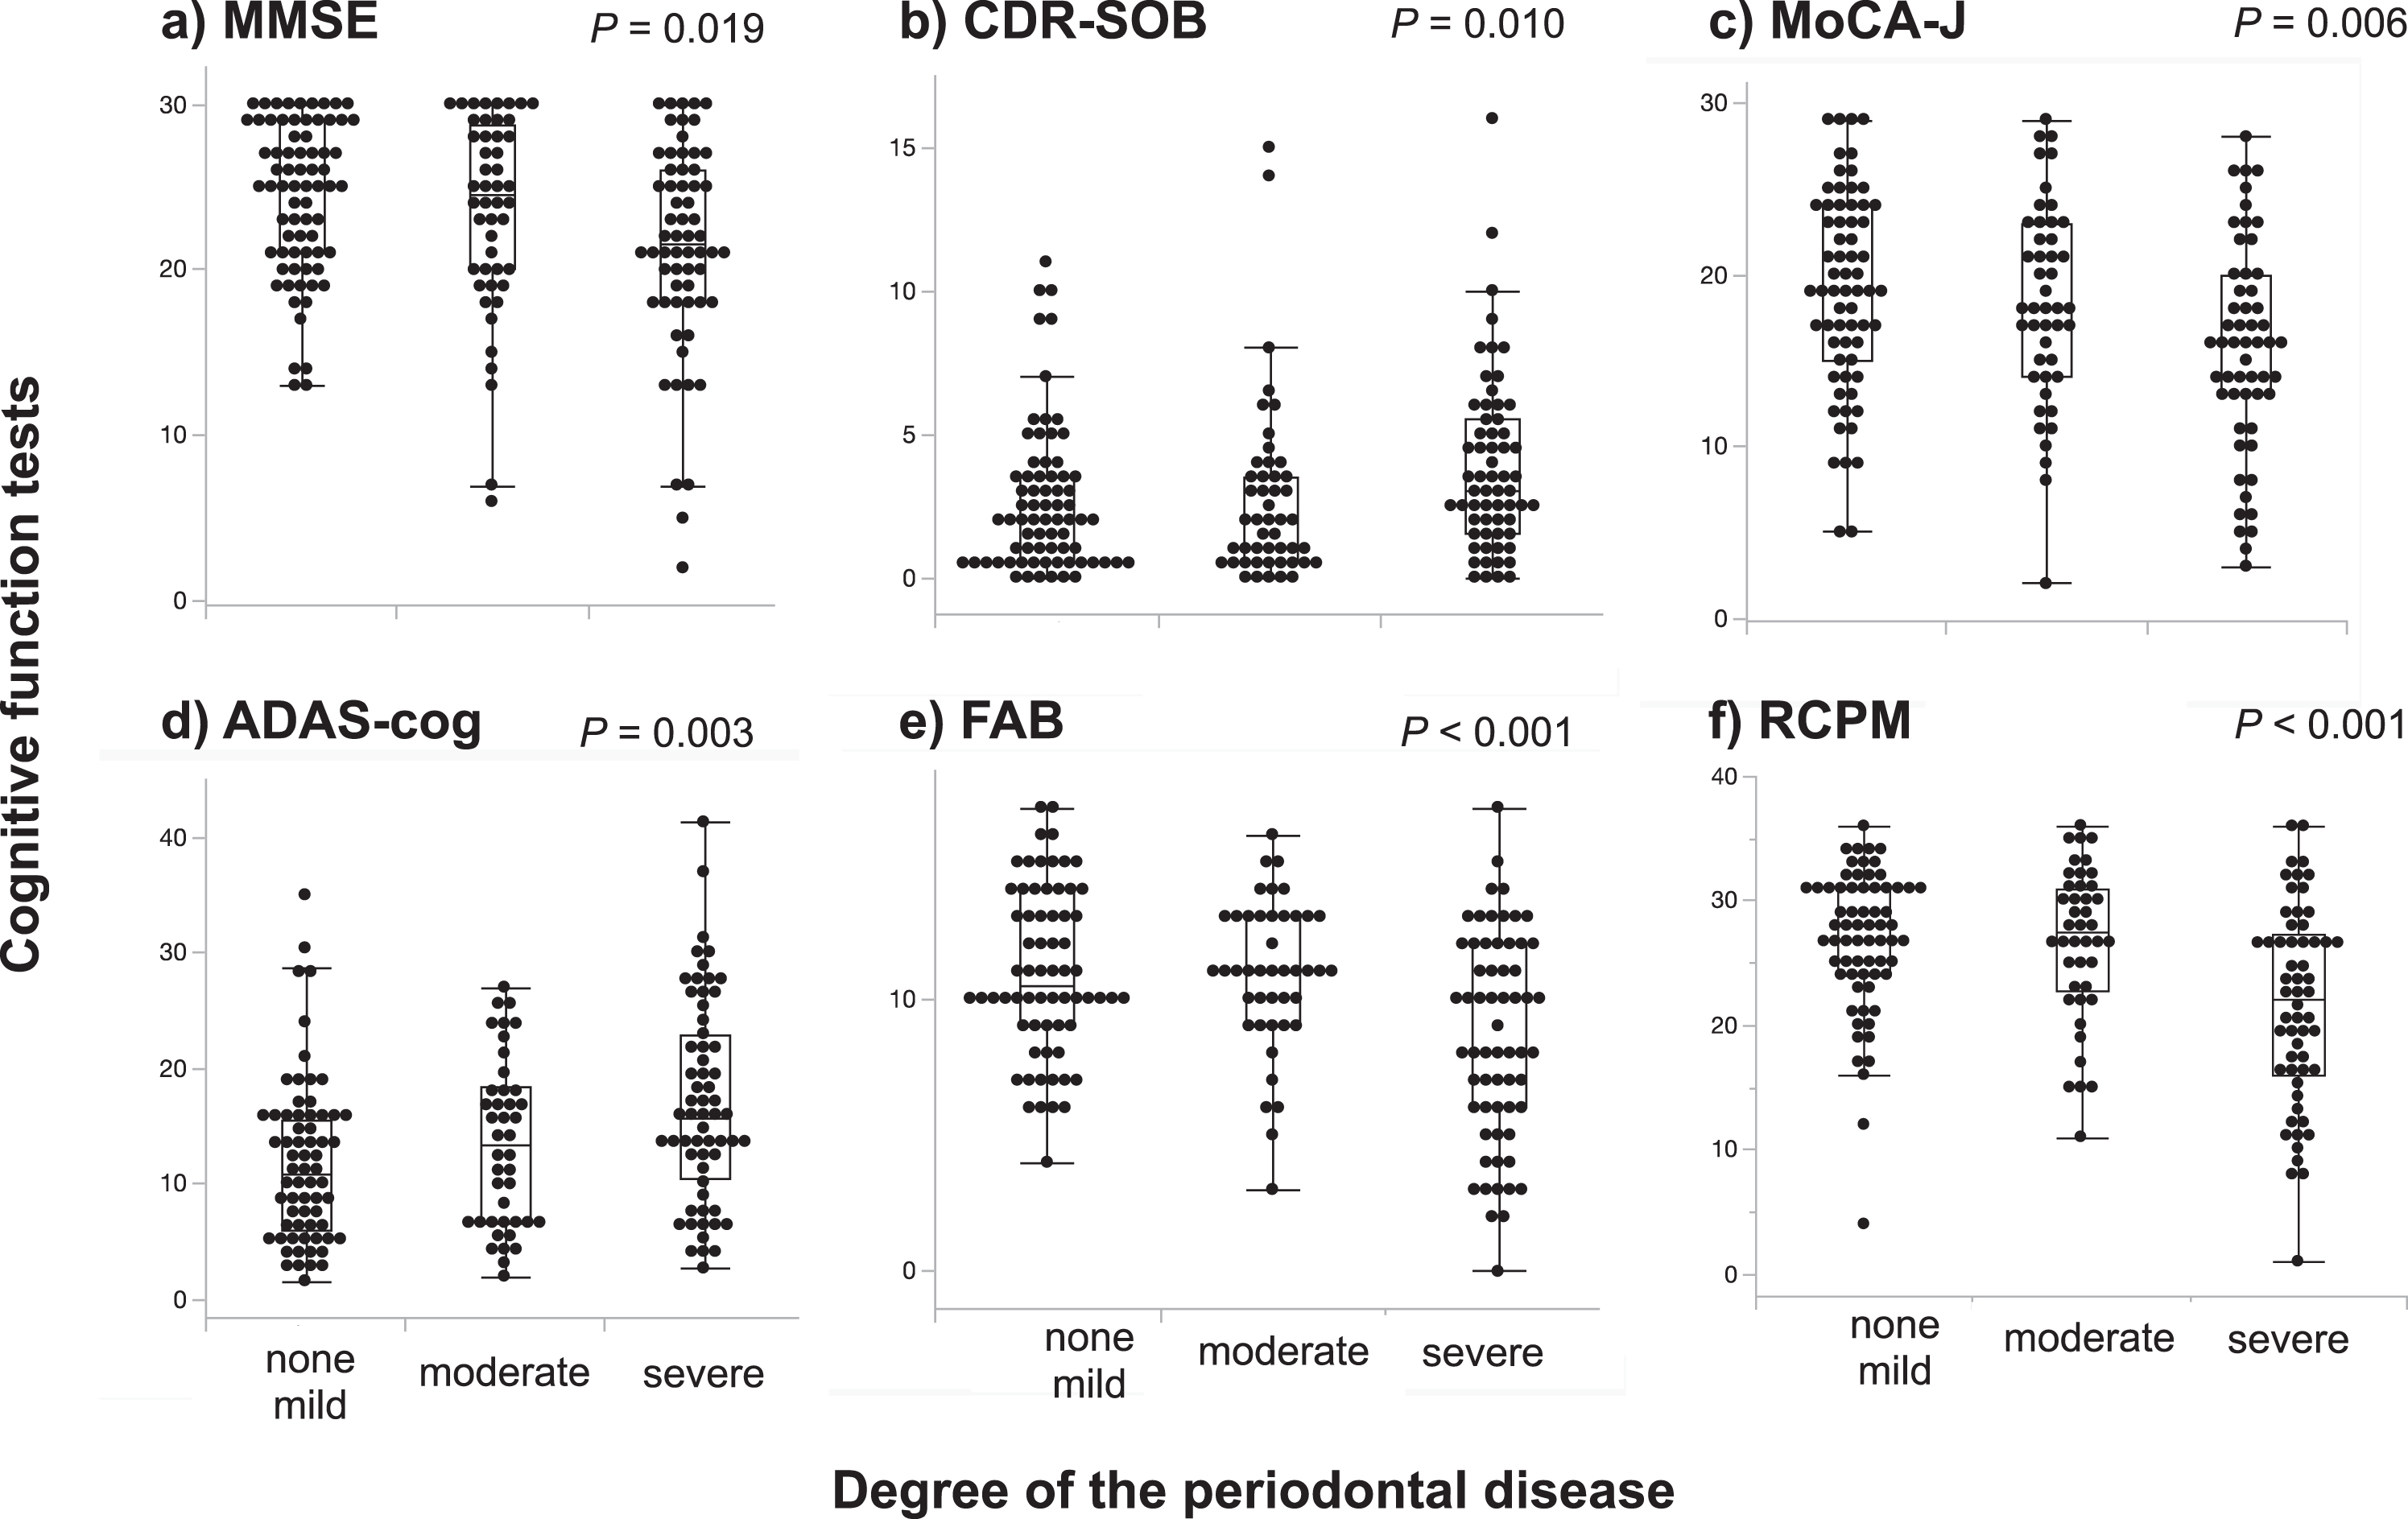 Associations between cognitive function tests and the degree of periodontal disease divided by three groups. The results of cognitive function tests indicated by MMSE (a), CDR-SOB (b), MoCA-J (c), ADAS-cog (d), FAB (e), and RCPM (f) are plotted relative to the degree of periodontal disease stratified into three groups based on the following classifications: none or mild, moderate, and severe periodontal disease. Degree of cognitive impairment increase with increasing degrees of periodontal disease (Kruskal–Wallis test). ADAS-cog, Alzheimer’s Disease Assessment Scale-Cognitive Subscale; CDR-SOB, Clinical Dementia Rating-sum of boxes; FAB, Frontal Assessment Battery; MMSE, Mini-Mental State Examination; MoCA-J, Montreal Cognitive Assessment-Japanese version; RCPM, Raven’s Coloured Progressive Matrices.